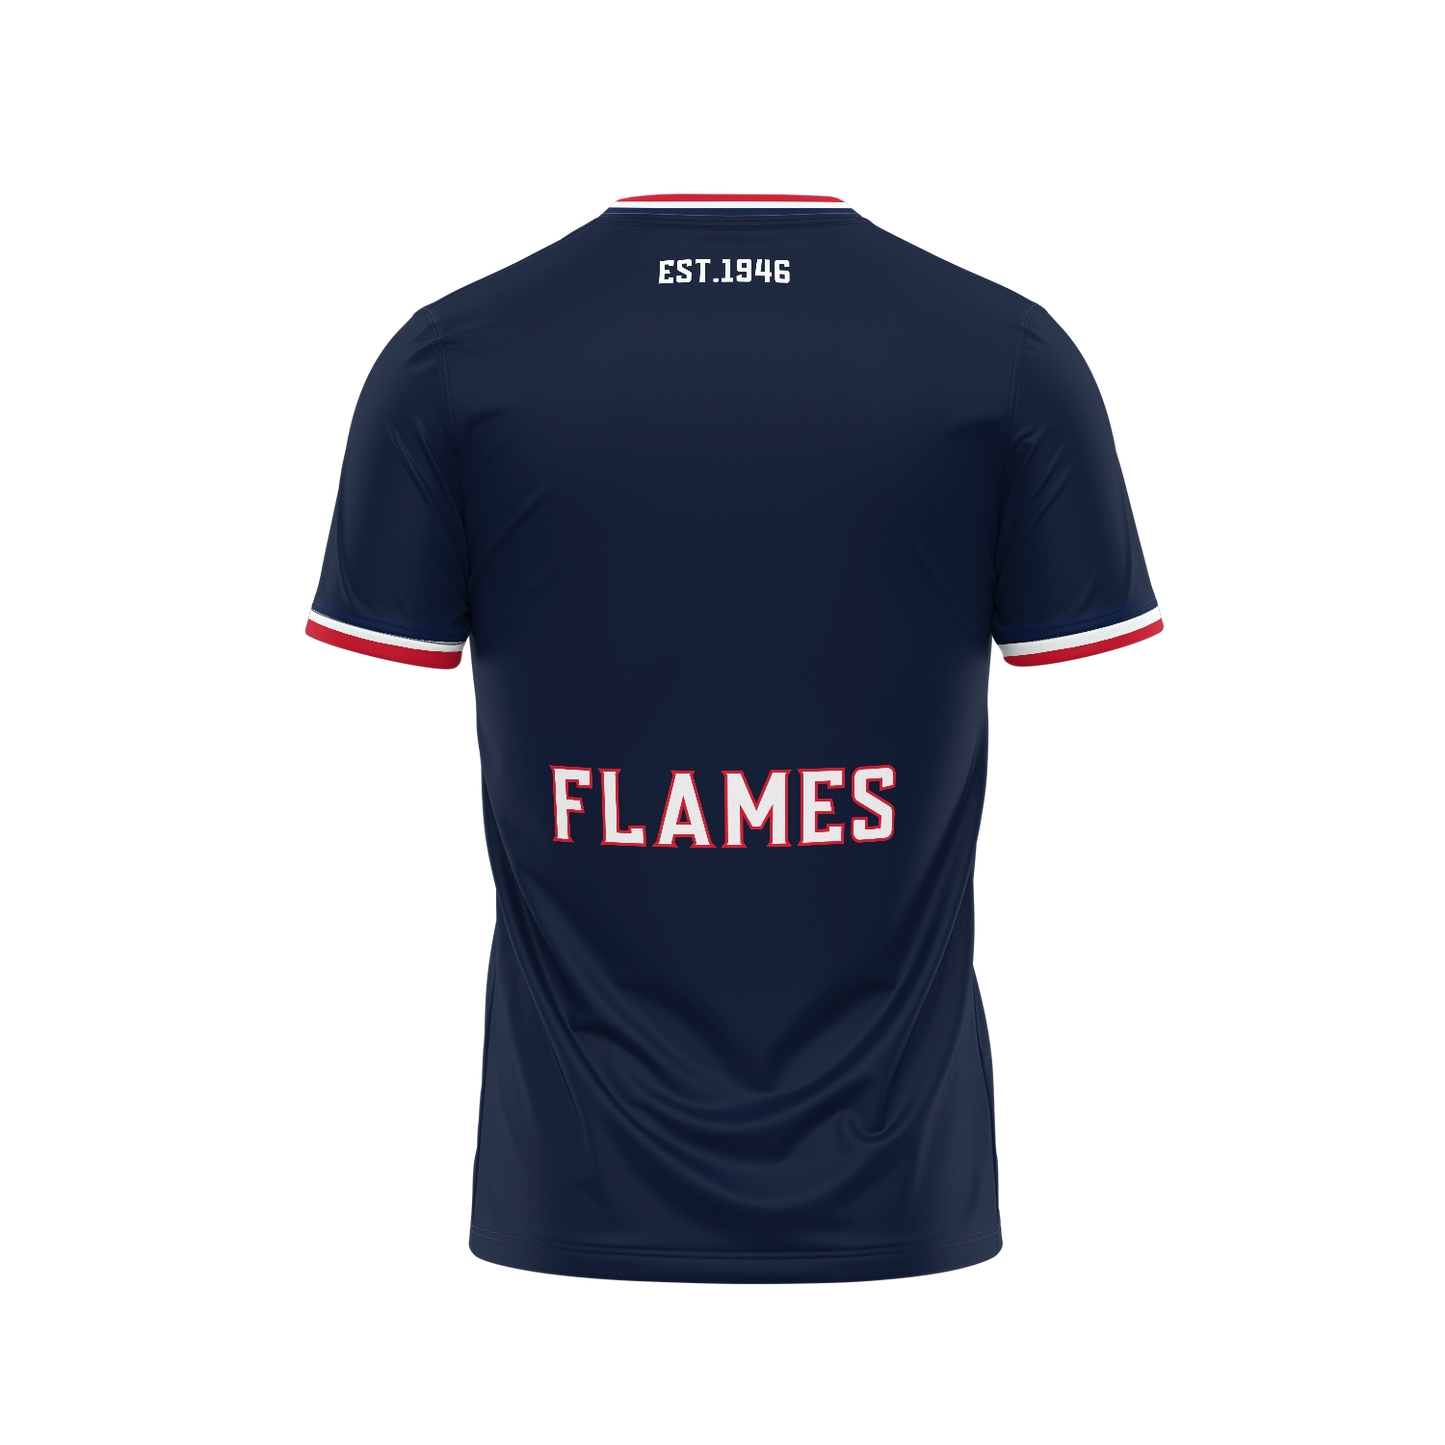 NORWOOD FLAMES - SUPPORTER JERSEY NAVY (NO NUMBER)